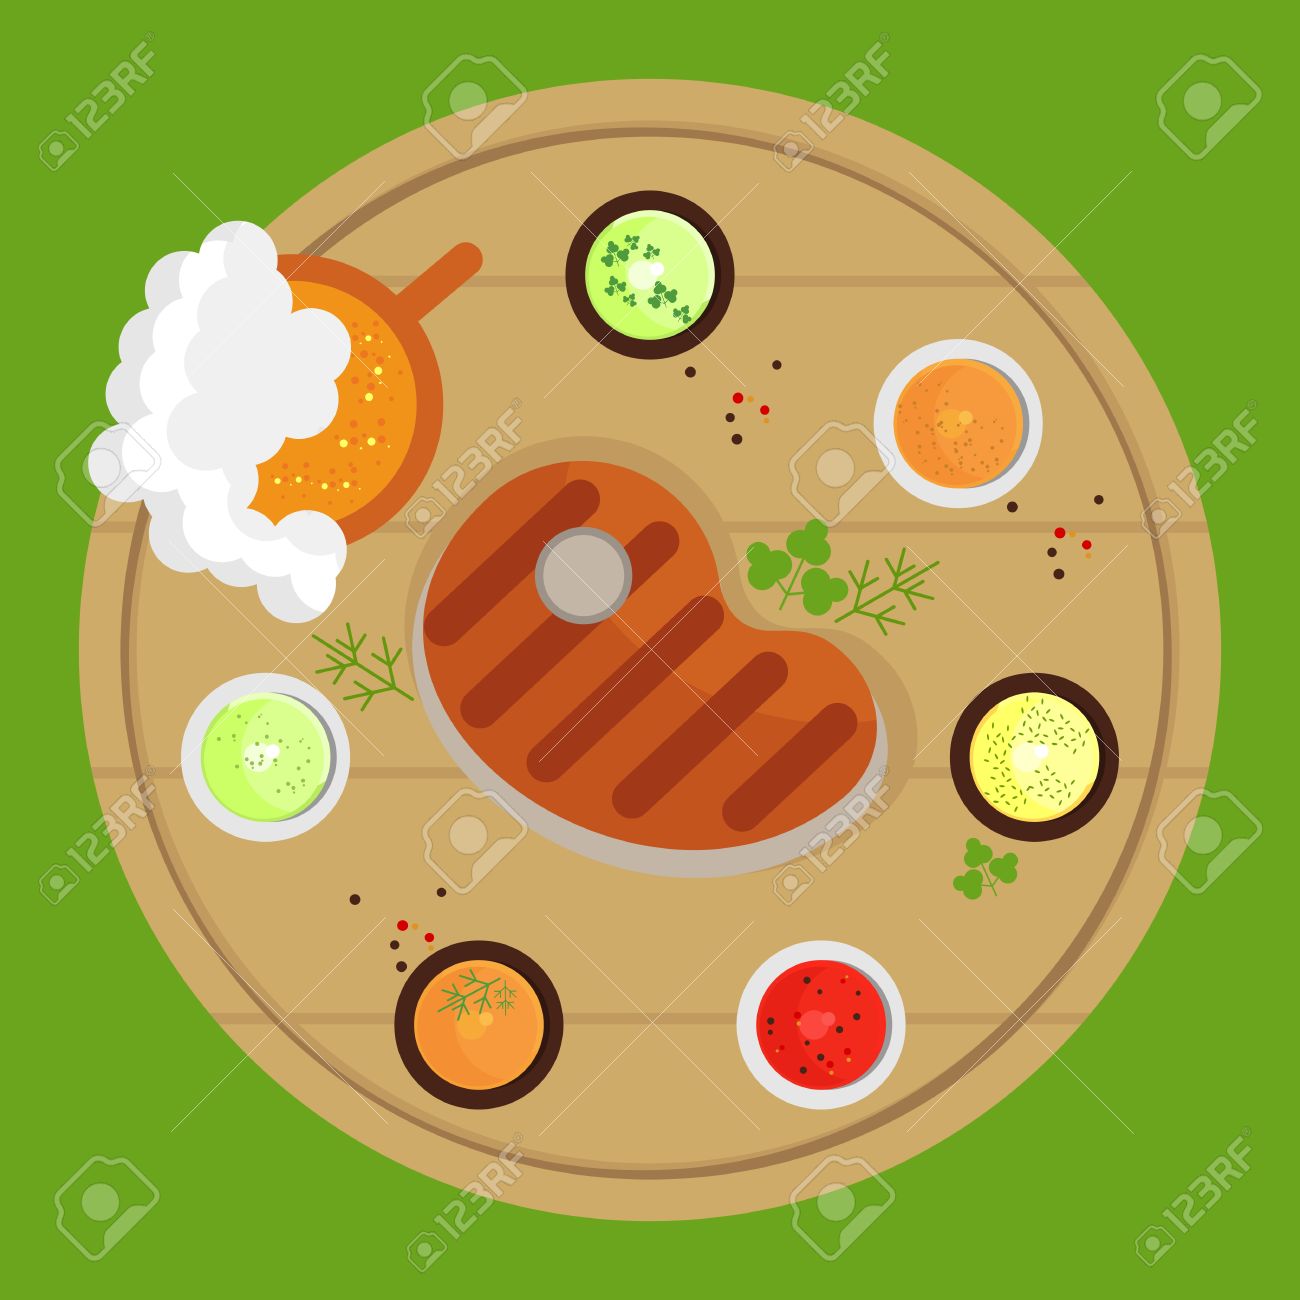 457 Grill Top Stock Vector Illustration And Royalty Free Grill Top.